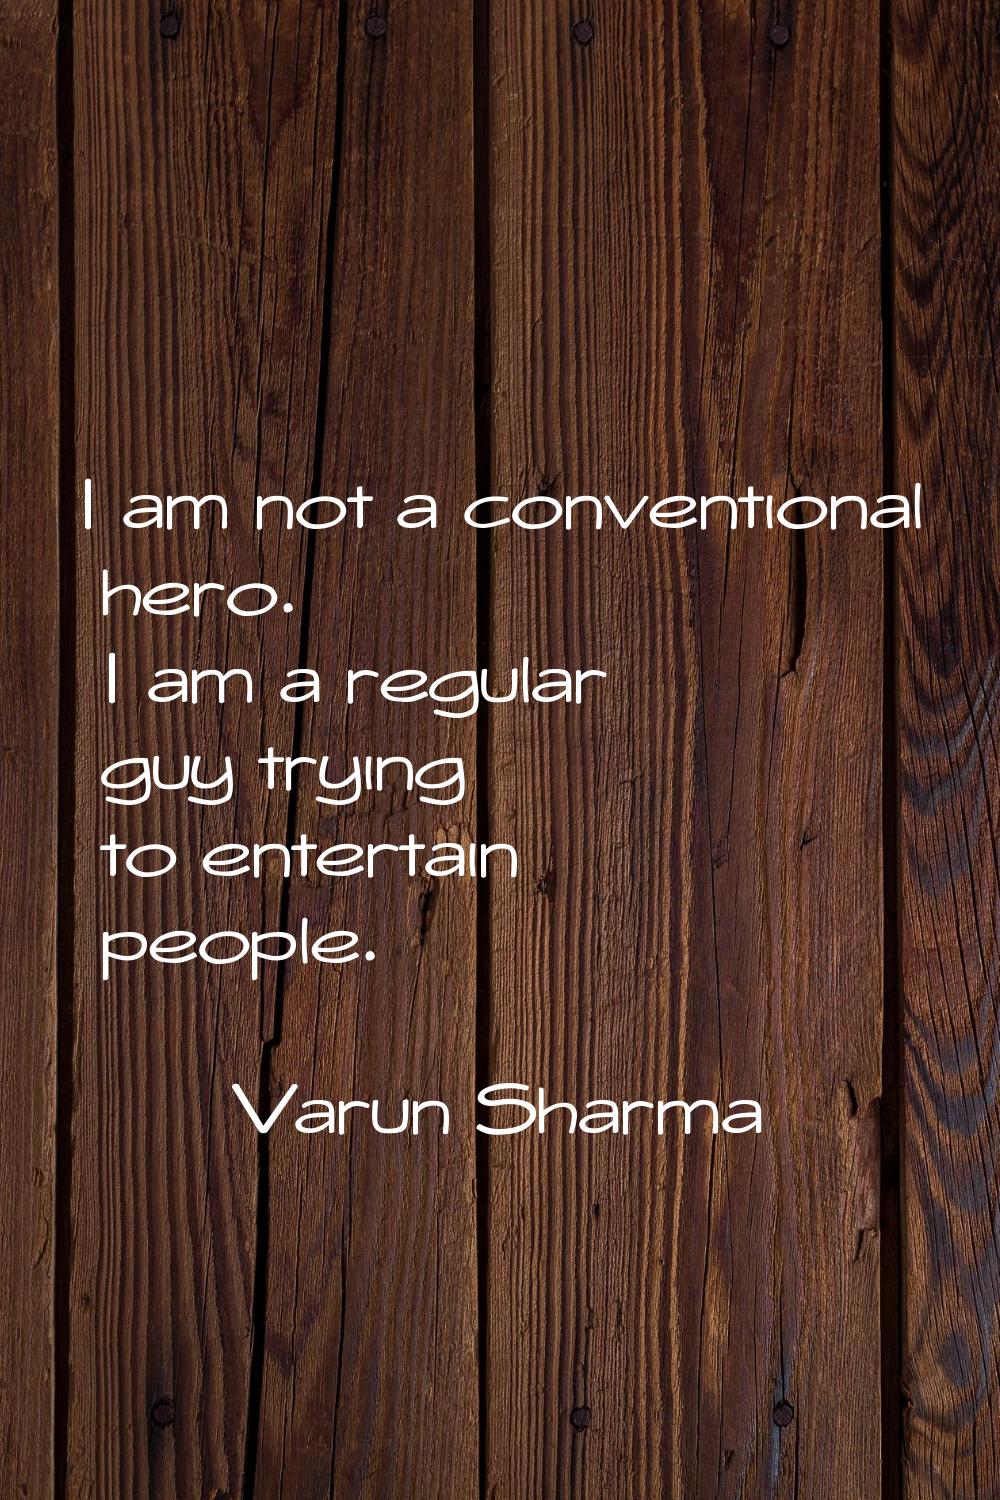 I am not a conventional hero. I am a regular guy trying to entertain people.